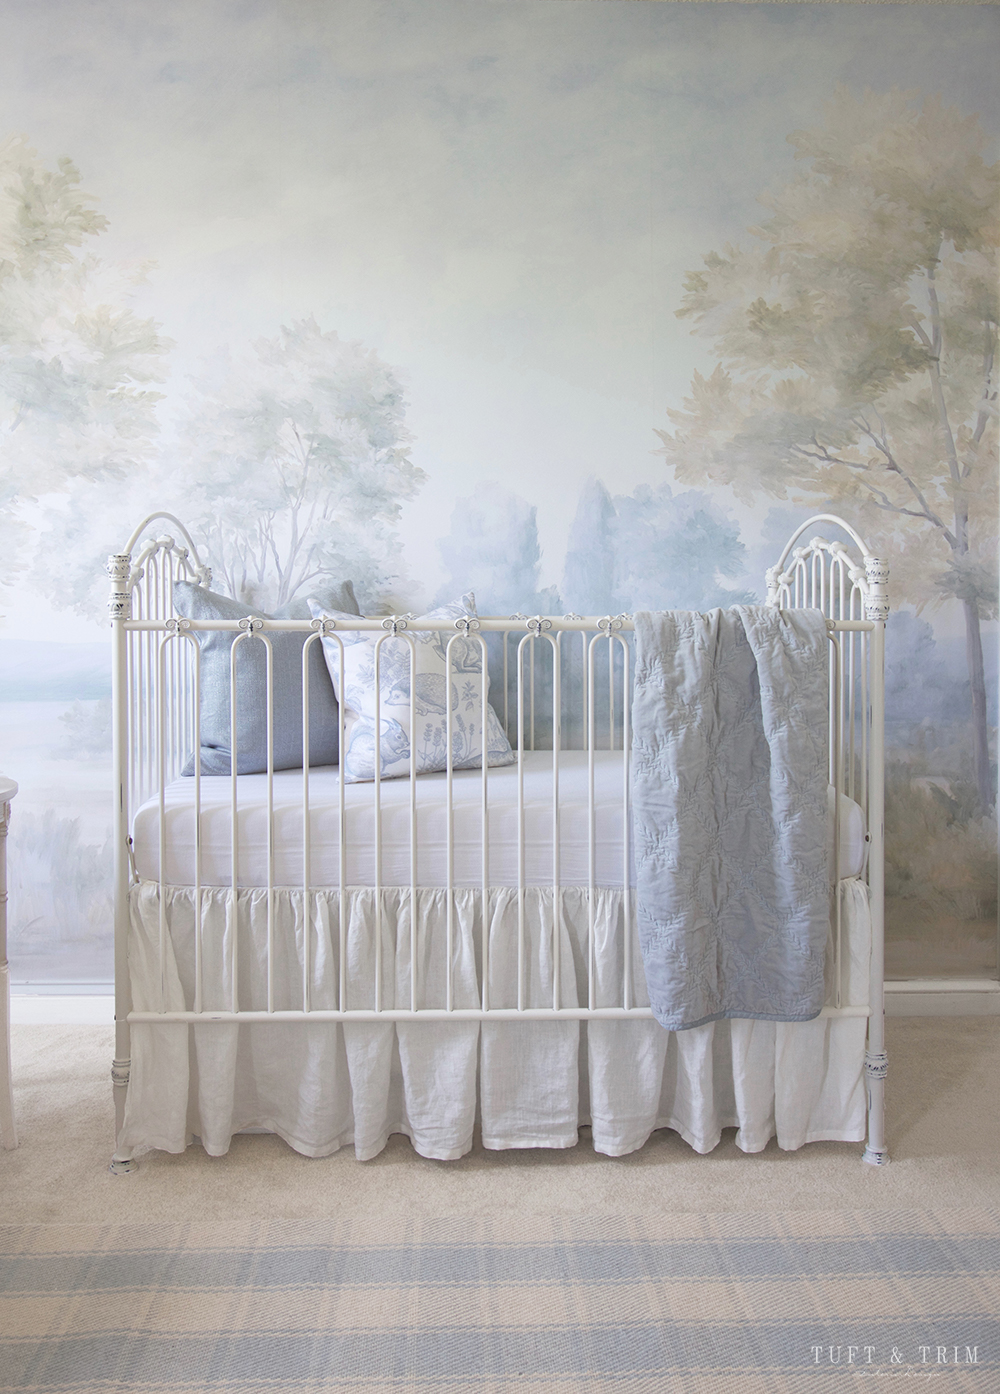 A Whimsical Nature Themed Nursery fit for a Prince. Design by Tuft & Trim Interior Design